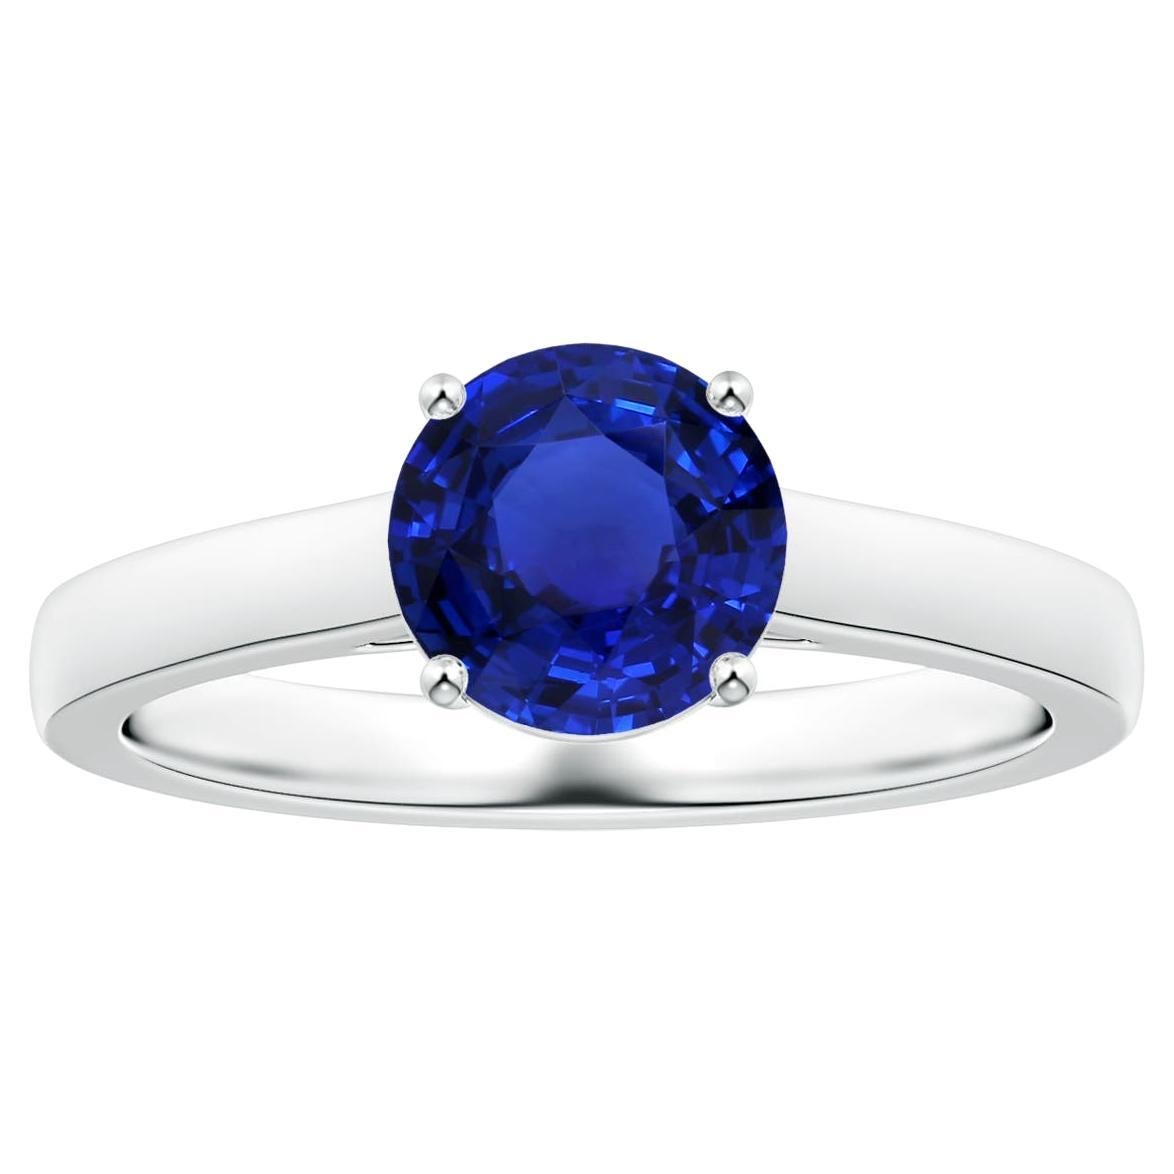 For Sale:  ANGARA Prong-Set GIA Certified Round Blue Sapphire Solitaire Ring in White Gold